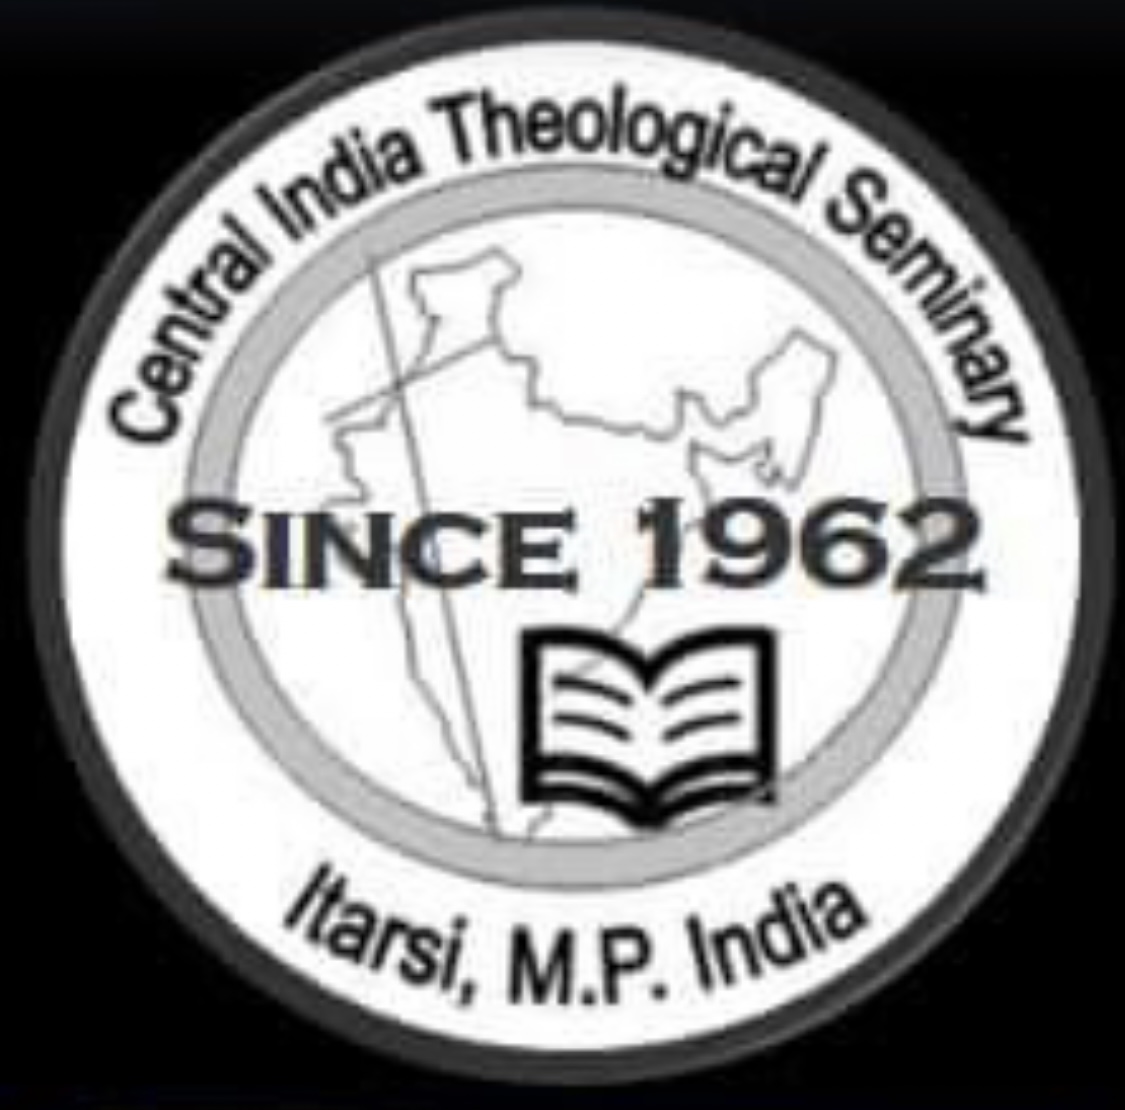 CENTRAL INDIA THEOLOGICAL SEMINARY